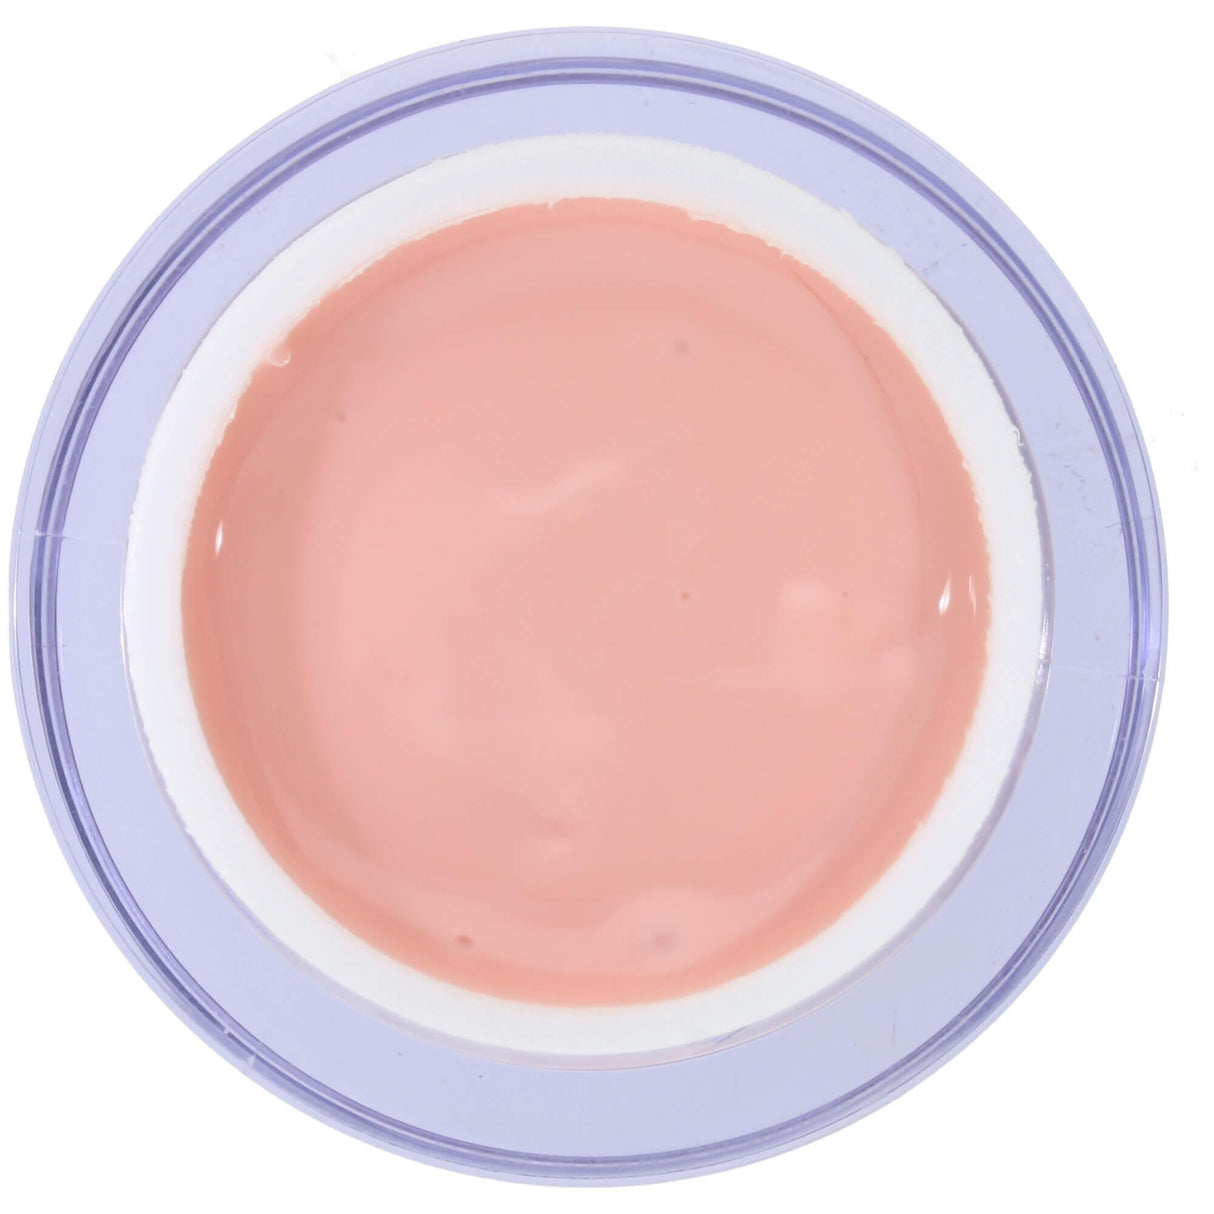 MSE Gel 207: Make Up Gel Rosa / rose 50ml - MSE - The Beauty Company